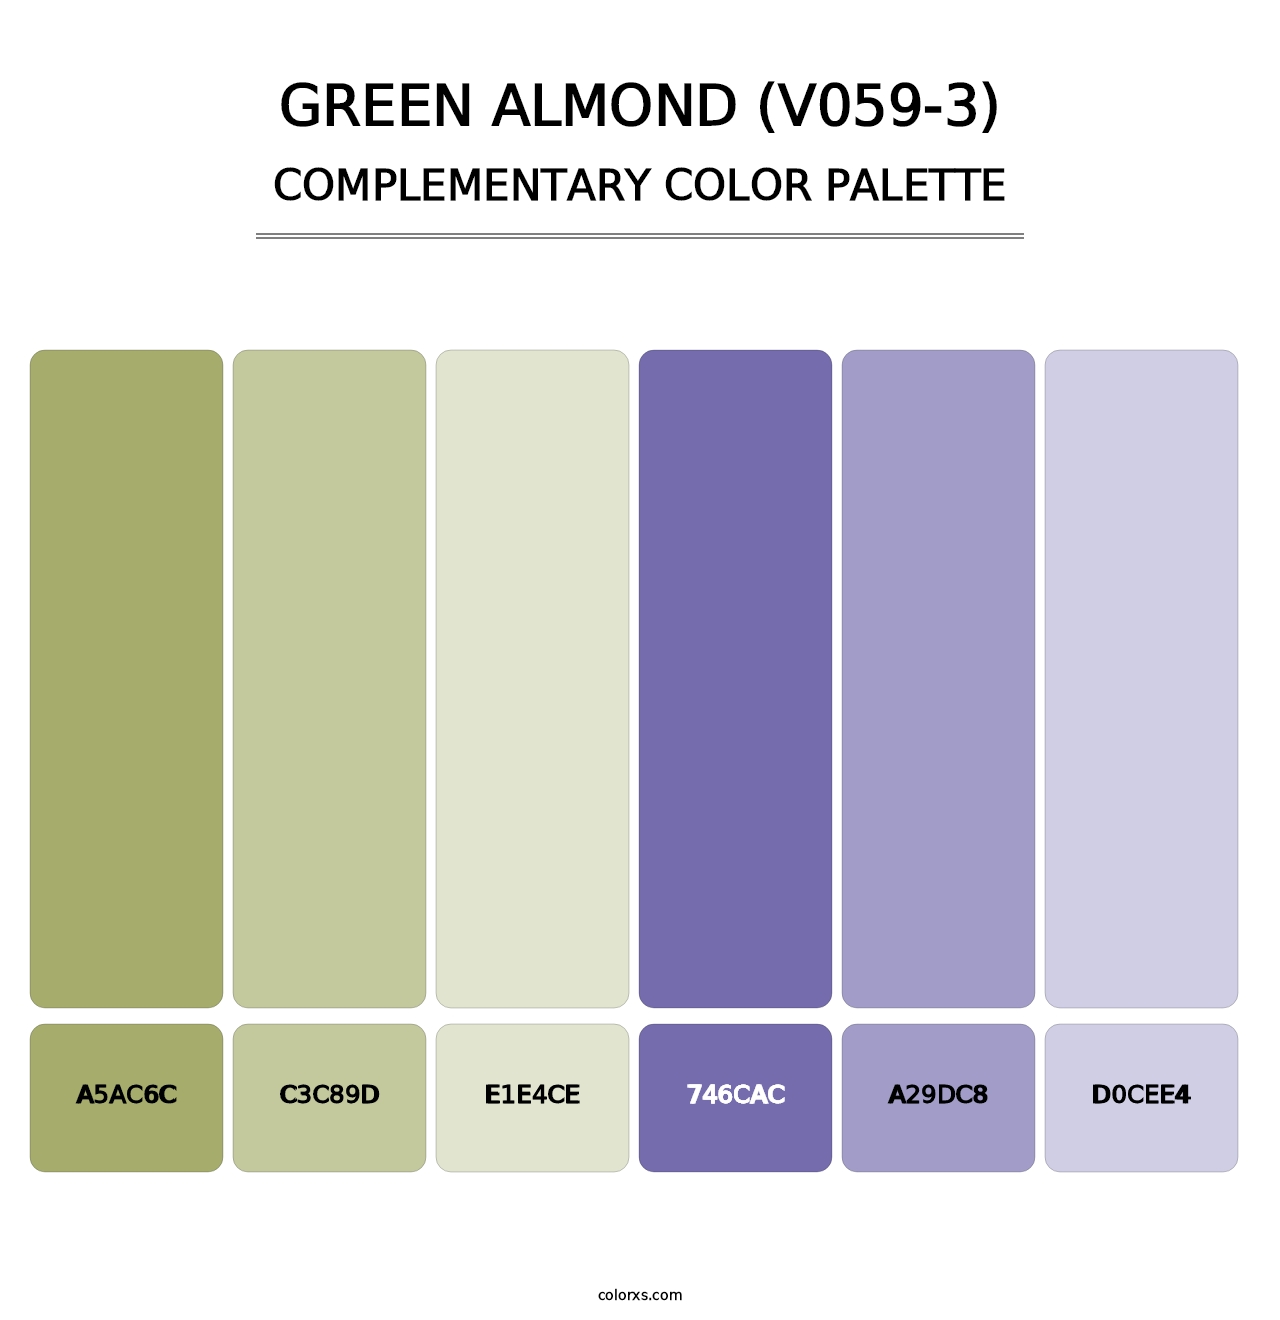 Green Almond (V059-3) - Complementary Color Palette